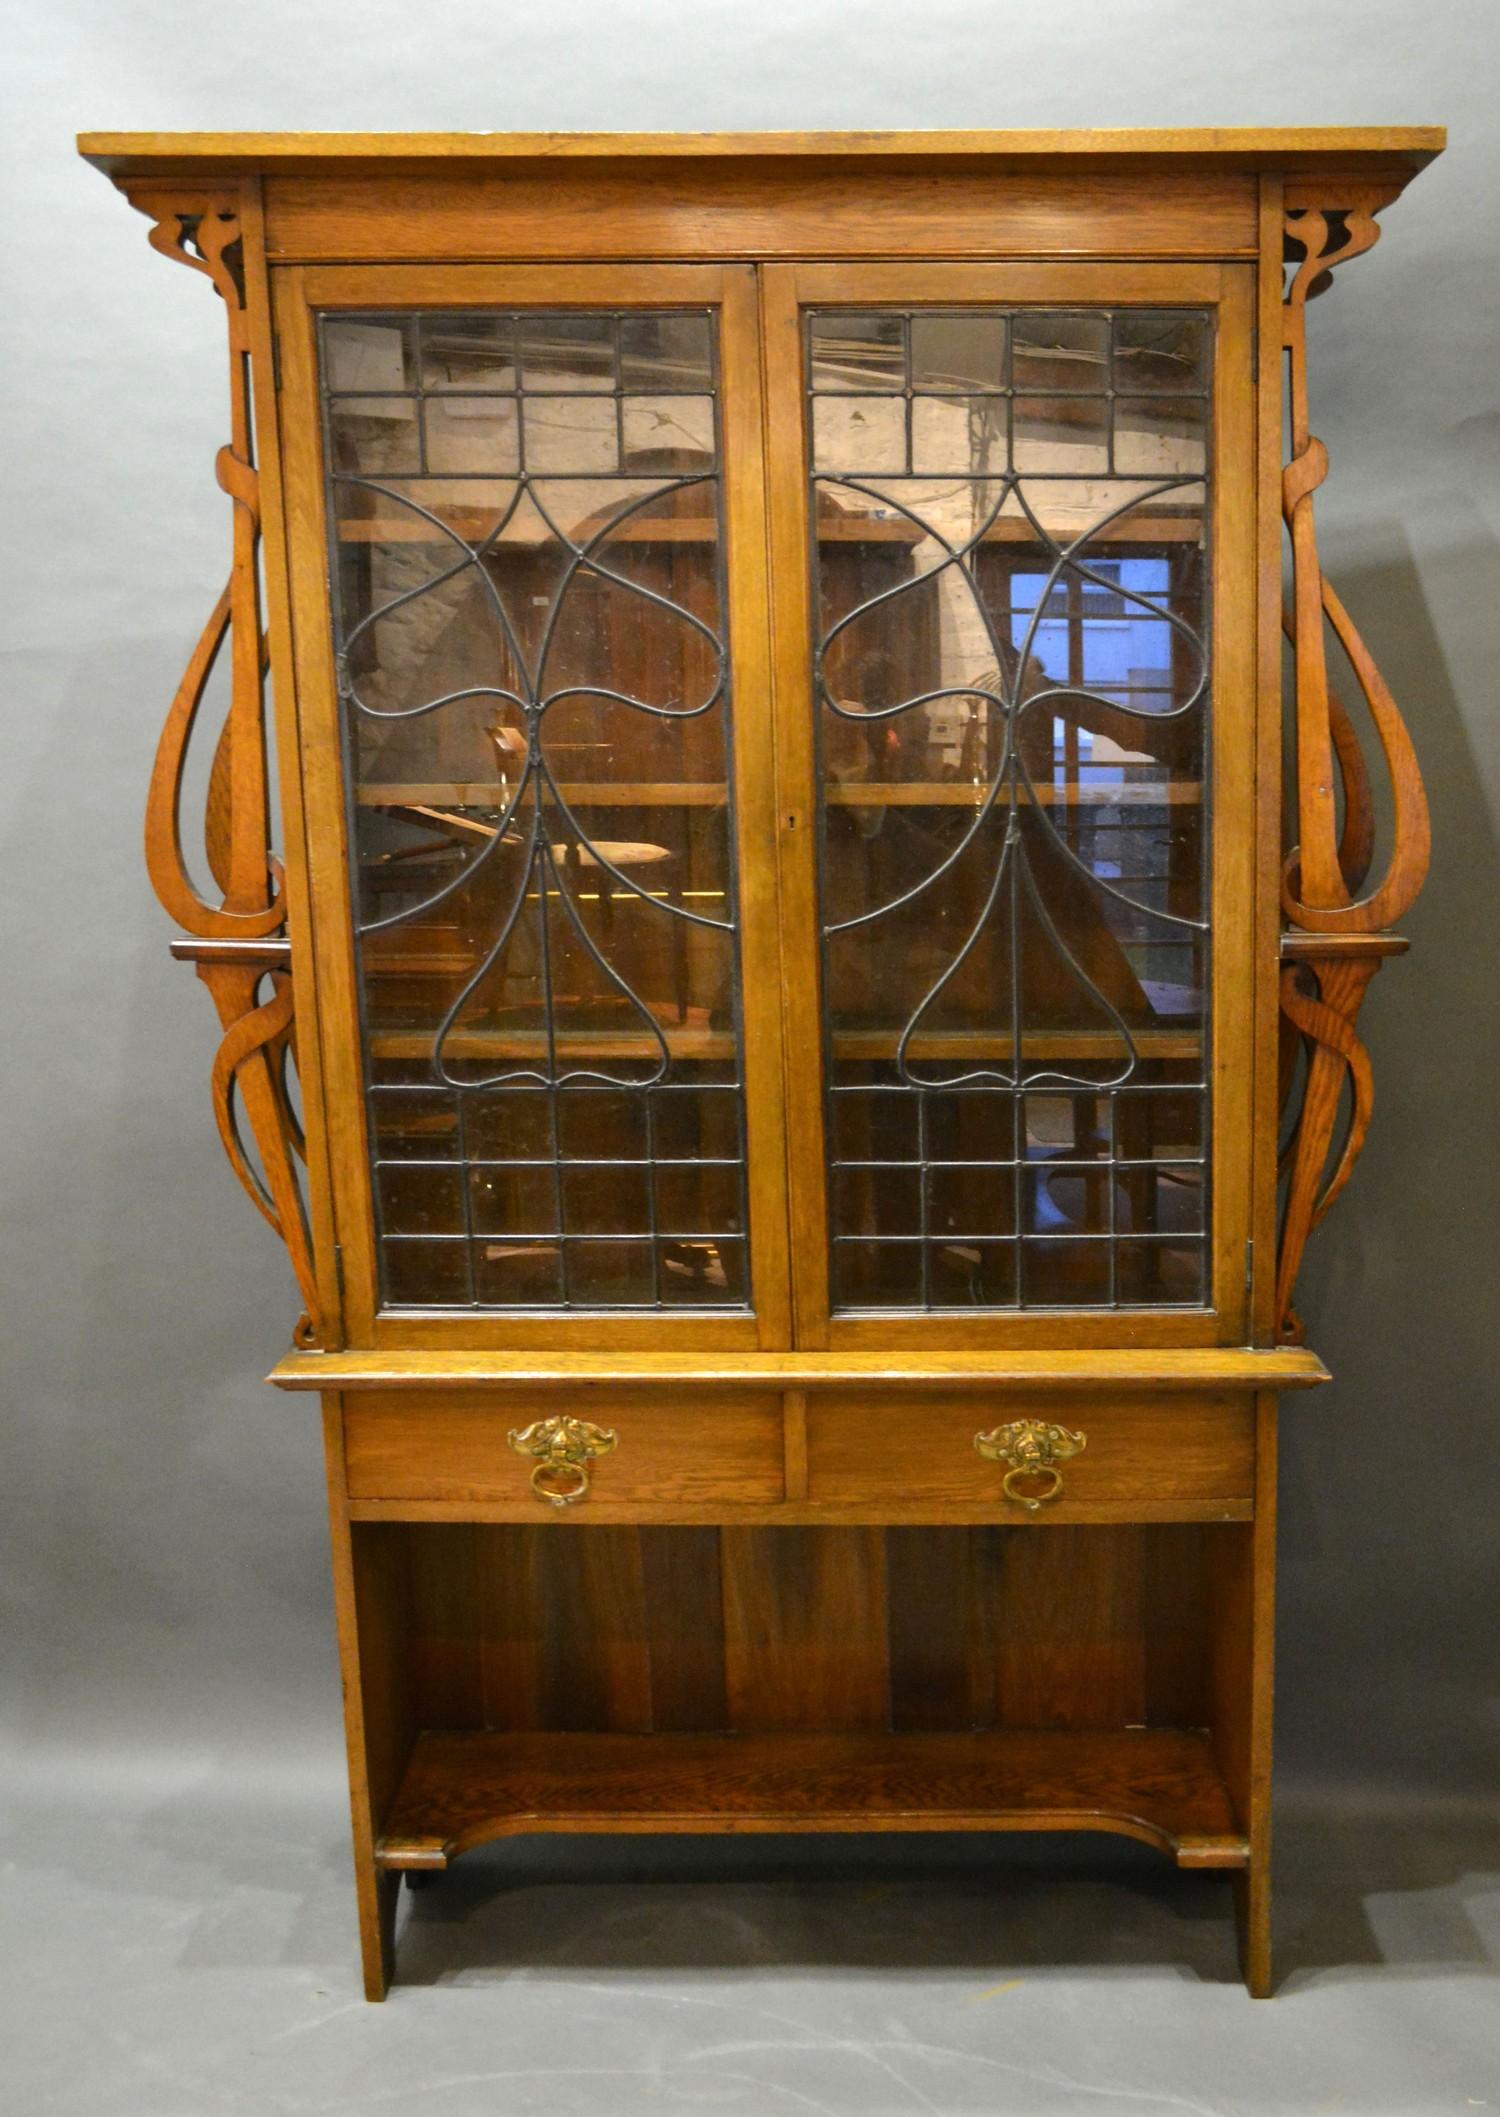 An Art Nouveau Oak Bookcase with two lead glazed doors enclosing shelves flanked by shaped pierced